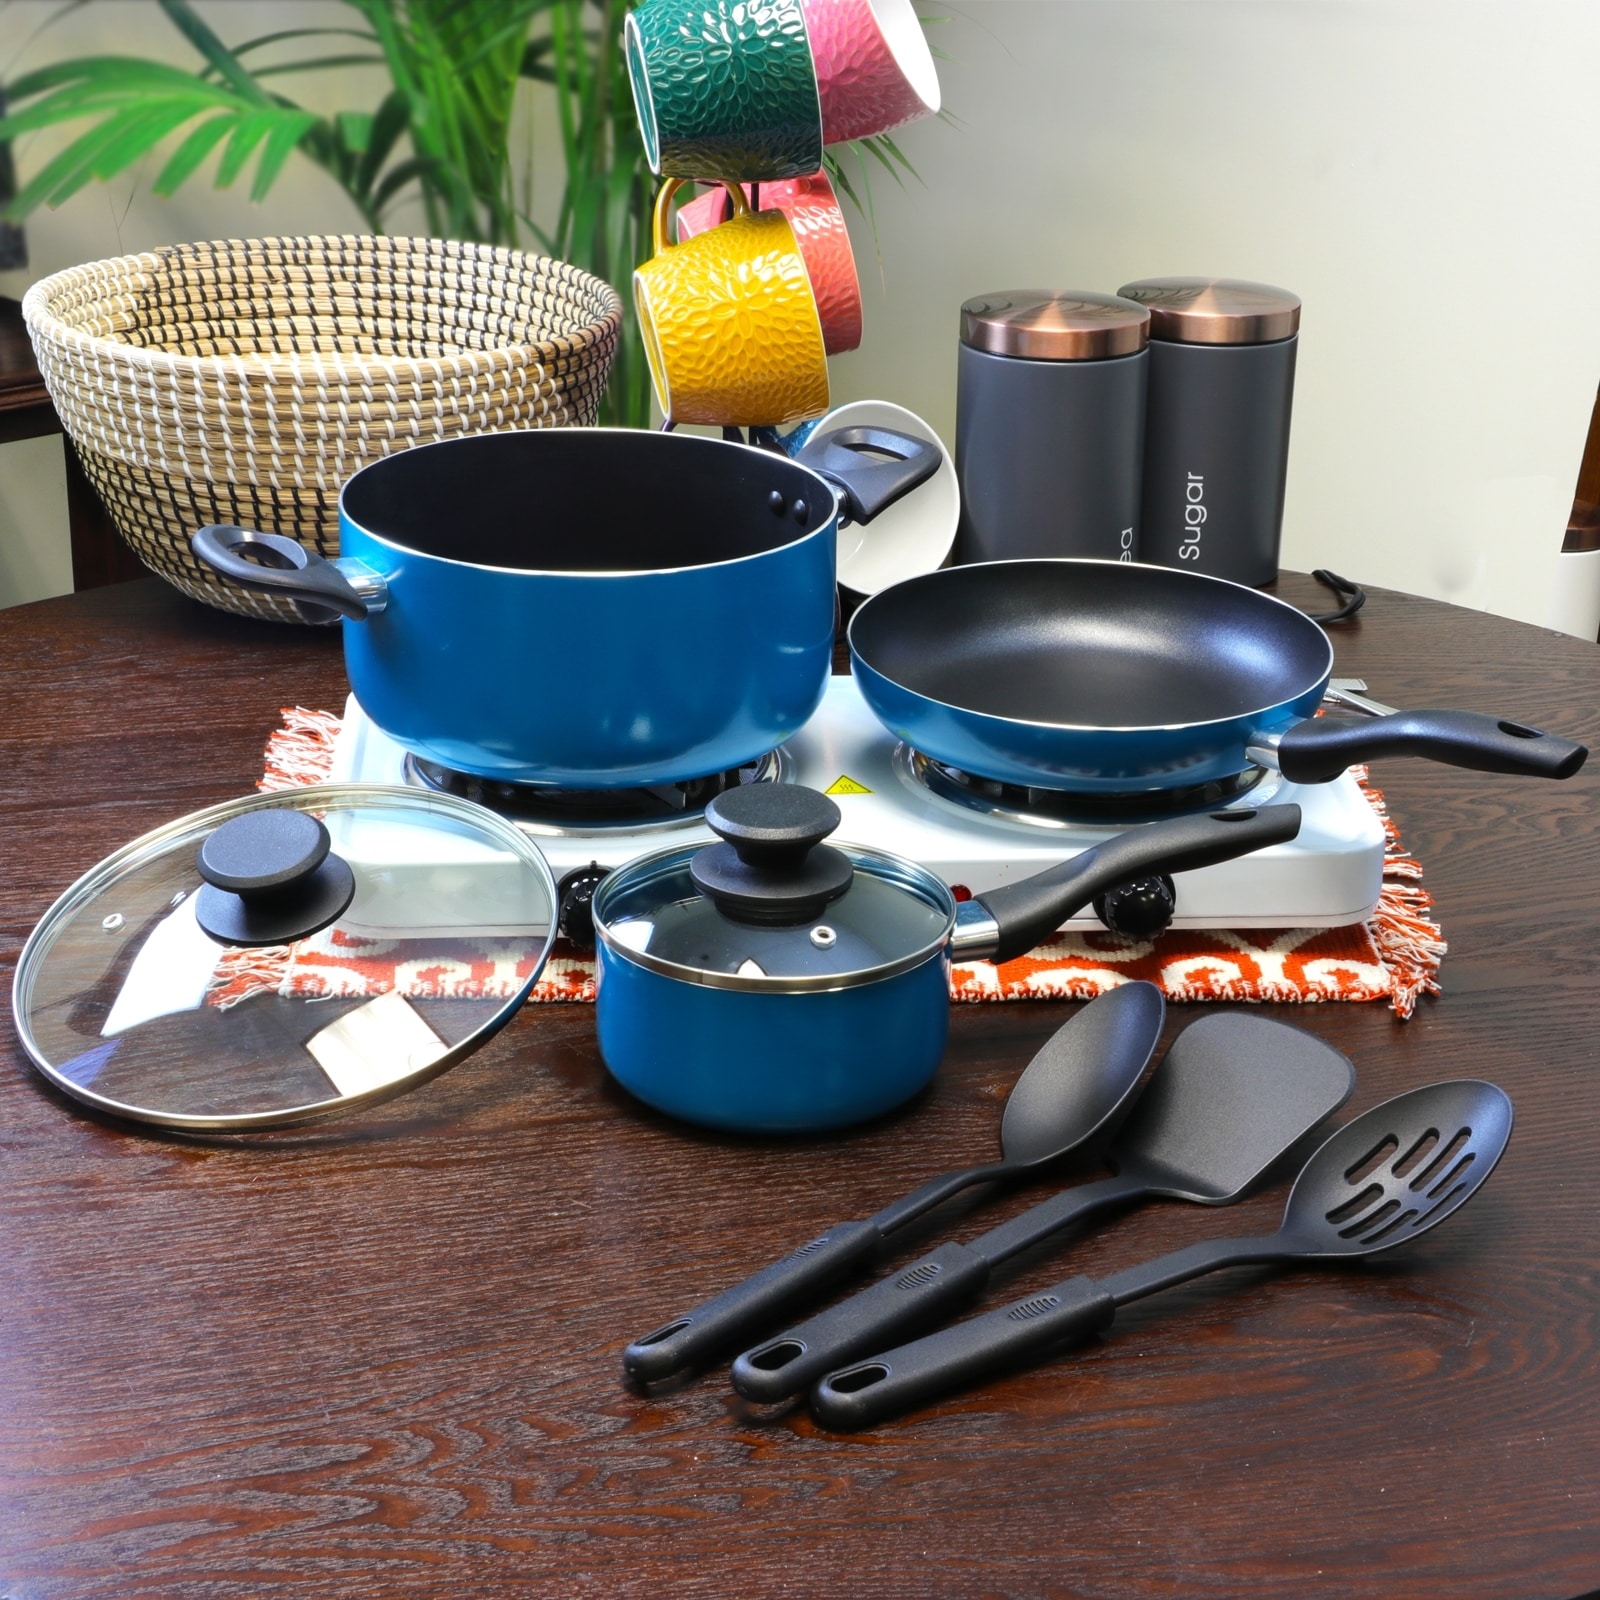 https://ak1.ostkcdn.com/images/products/is/images/direct/81352bdc7b0f1c7b244f0850d73692ea0b922c3d/Gibson-Palmer-8pc-Cookware-Set-in-Turquoise.jpg